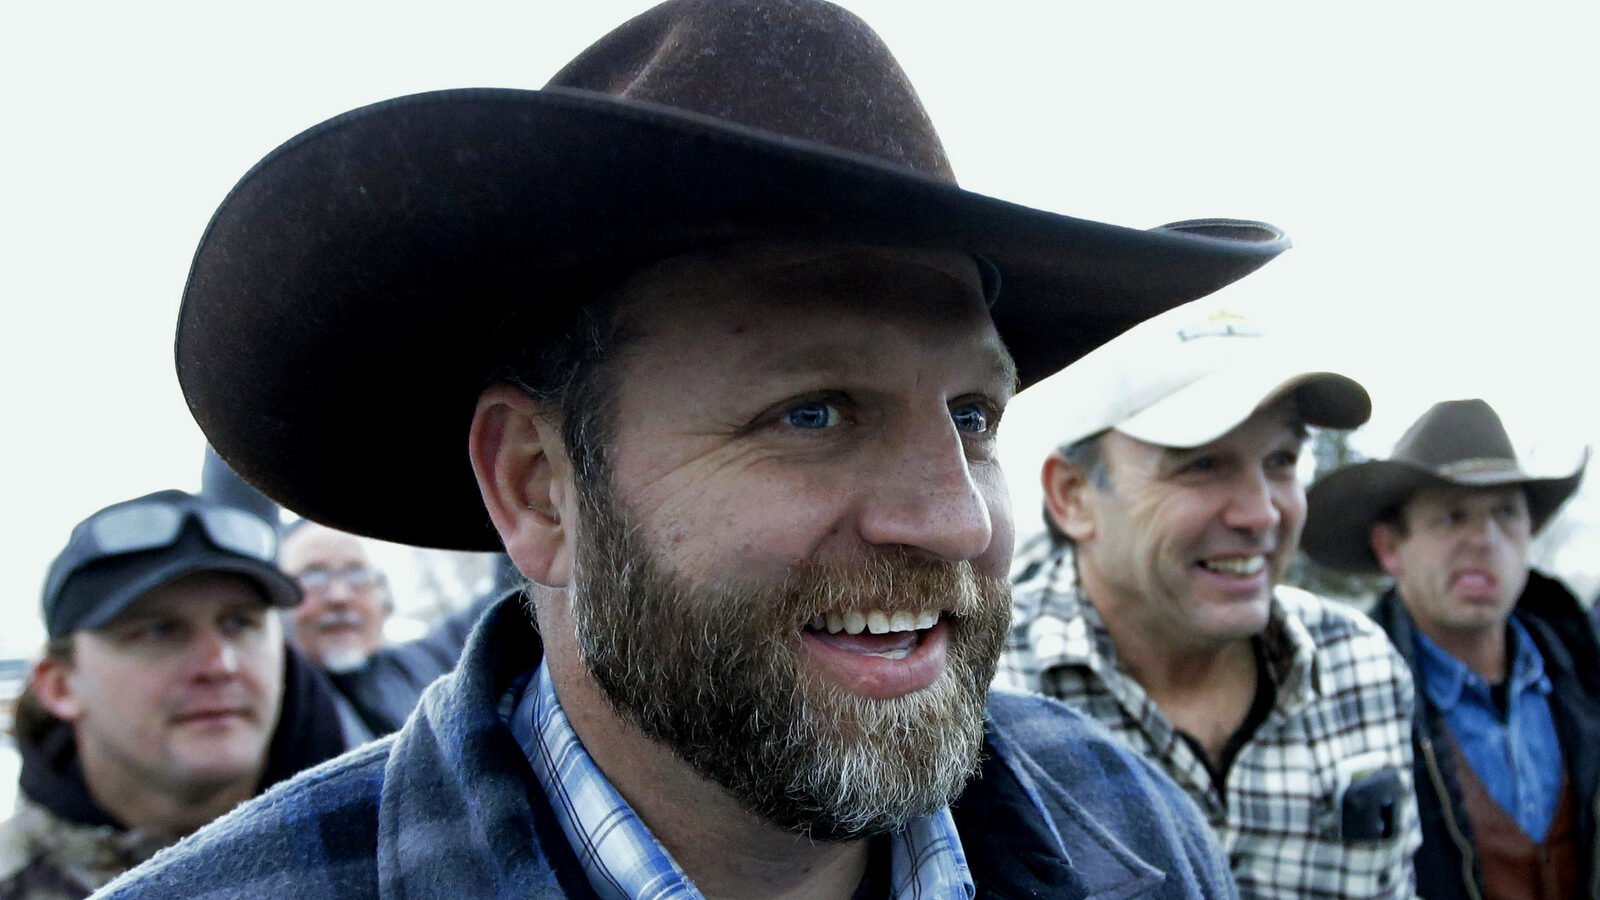 Ammon Bundy, one of the sons of Nevada rancher Cliven Bundy, smiles as he arrives for a news conference at Malheur National Wildlife Refuge after meeting with Harney County Sheriff David Ward Thursday, Jan. 7, 2016, near Burns, Ore. Ward and two other Oregon sheriffs met Thursday with Bundy, the leader of an armed group occupying a federal wildlife refuge and asked them to leave, after residents made it clear they wanted them to go home. (AP Photo/Rick Bowmer)